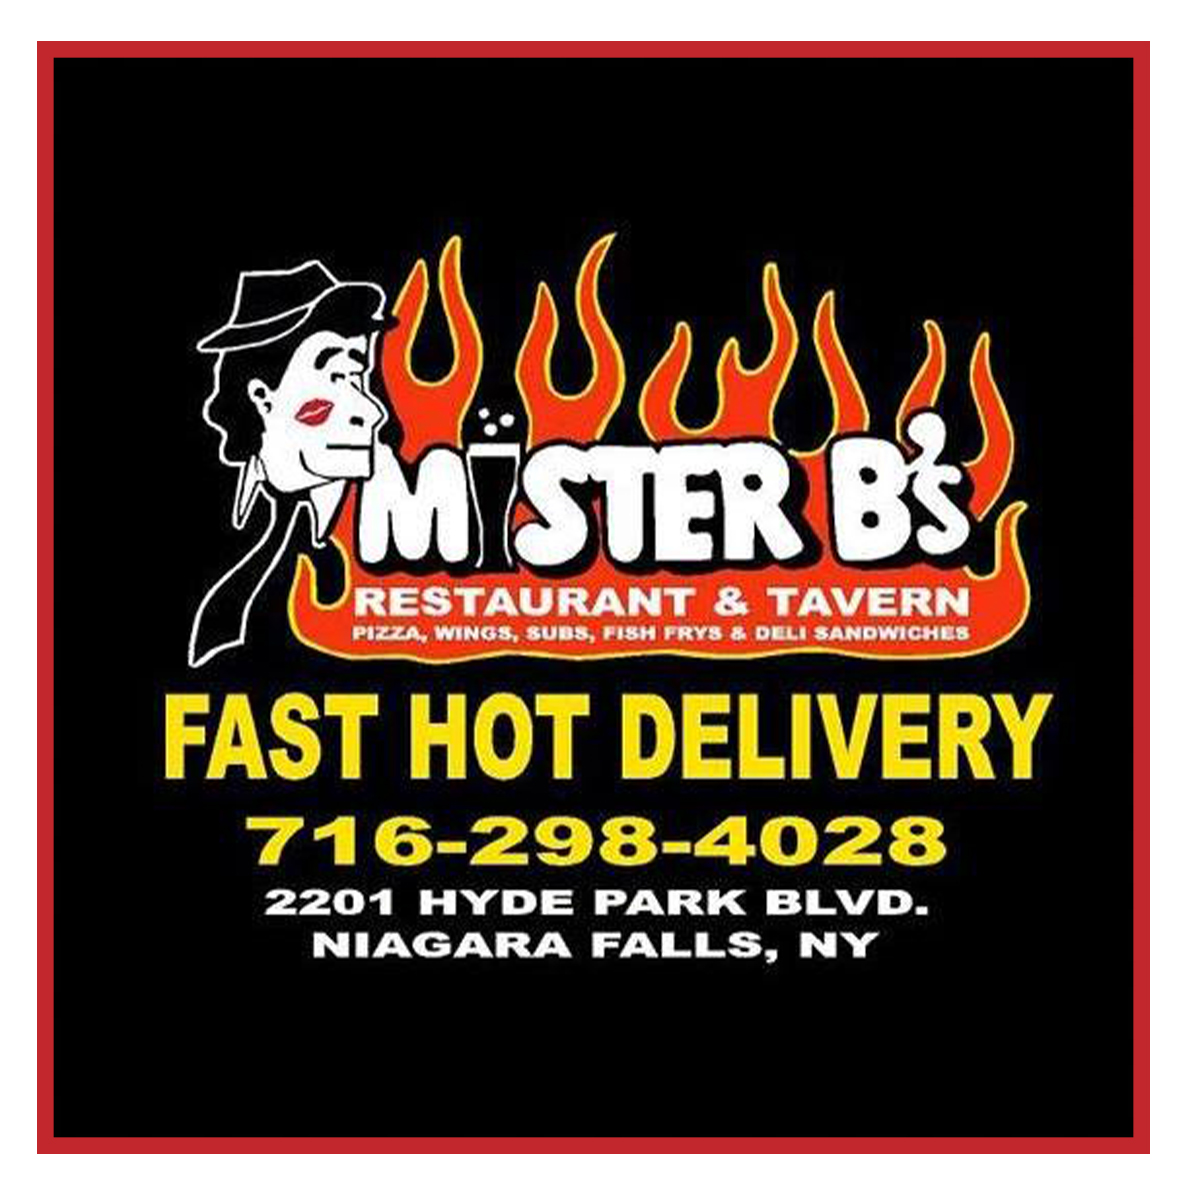 You are currently viewing Mister B’s Restaurant and Tavern